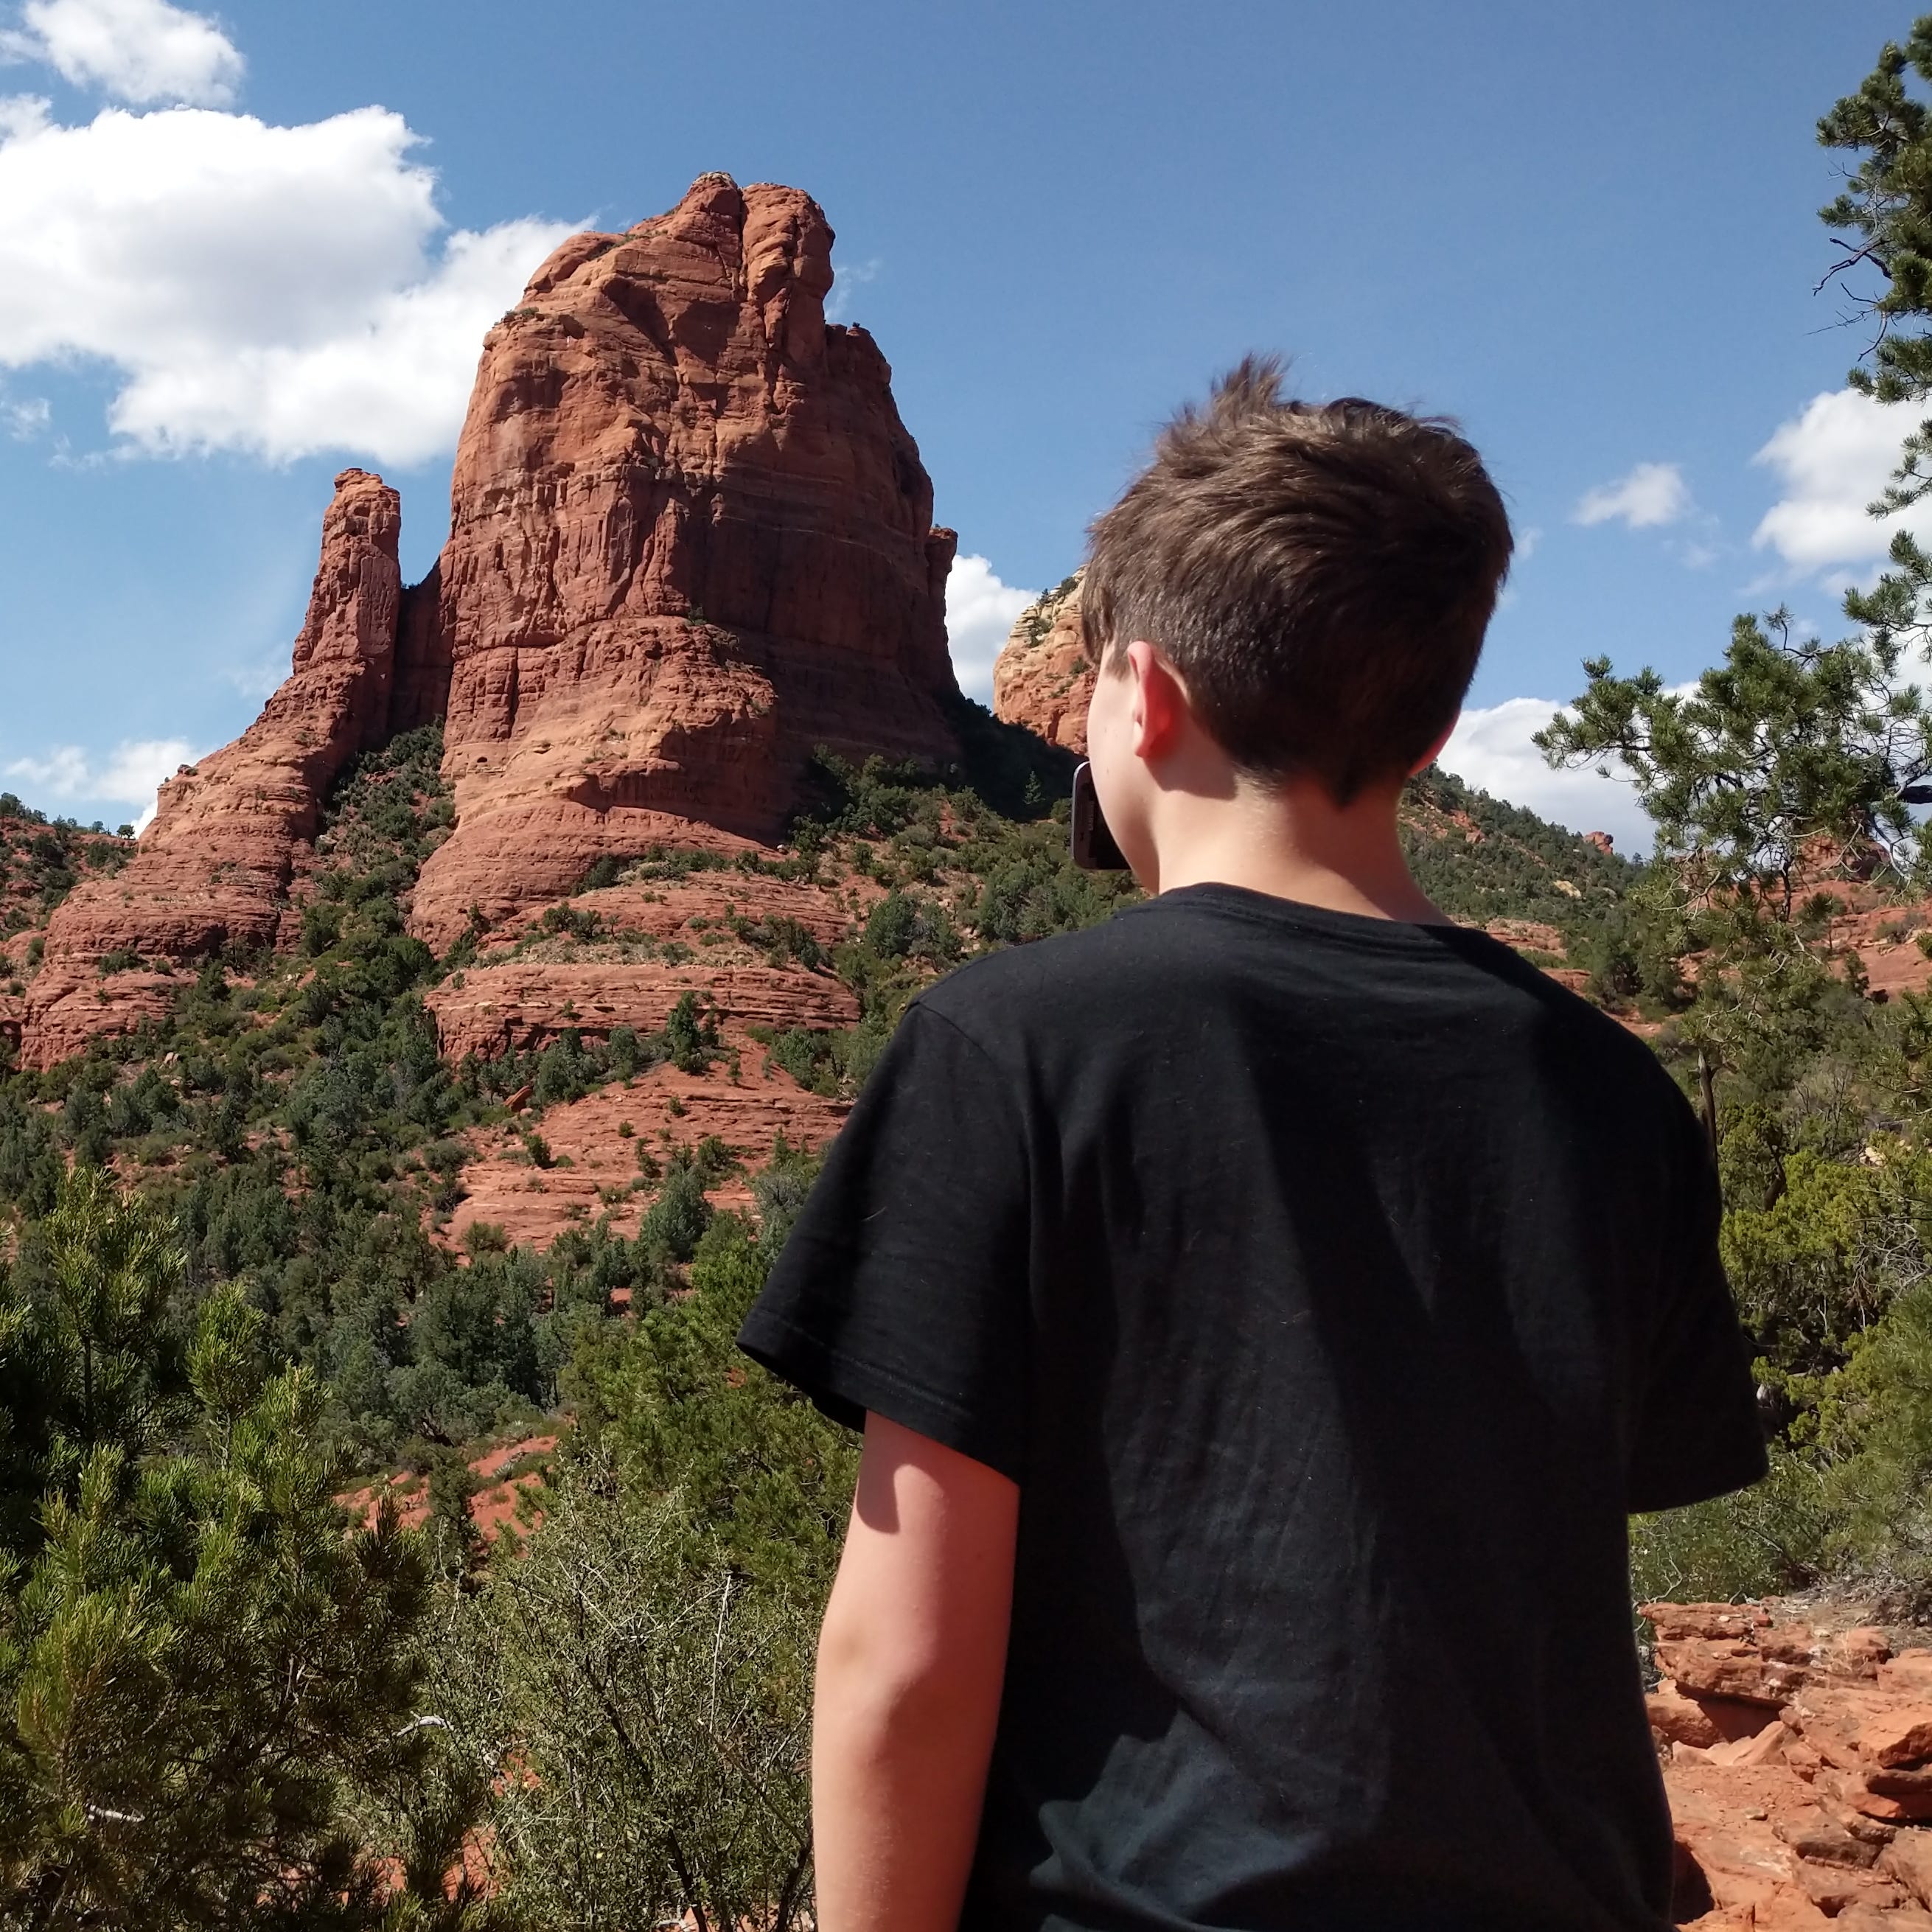 Iden Elliott surveys Sedona's red rocks at Soldier Pass. Sights like these are routine when you're hiking in the most beautiful place on earth.